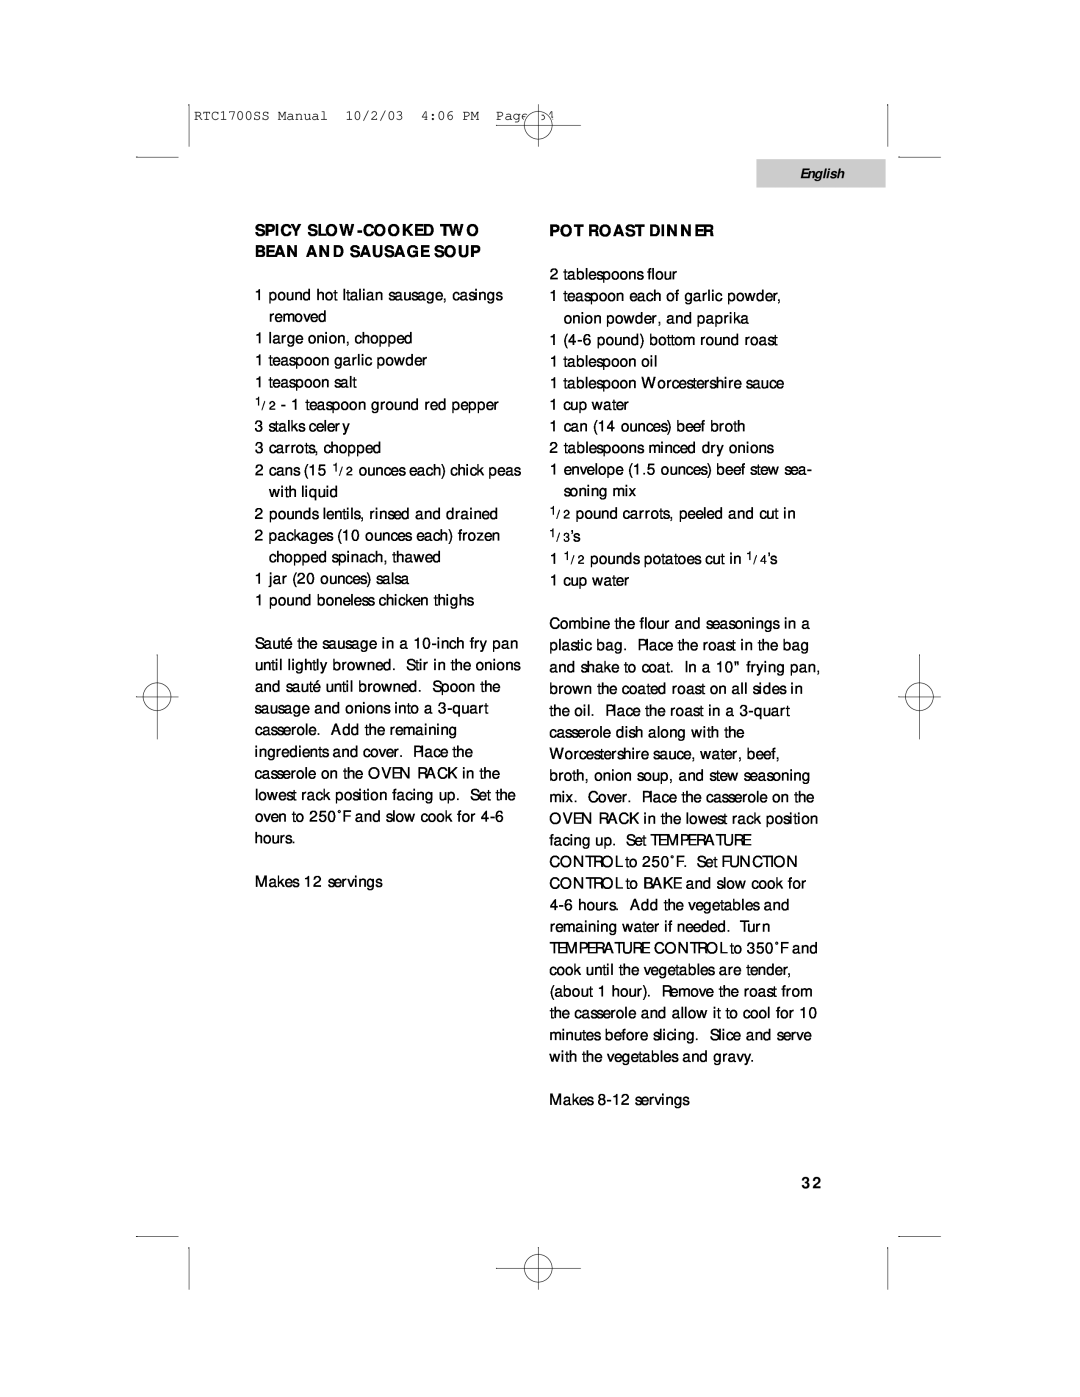 Haier RTC1700SS user manual English, Spicy Slow-Cooked Two Bean And Sausage Soup, Pot Roast Dinner 